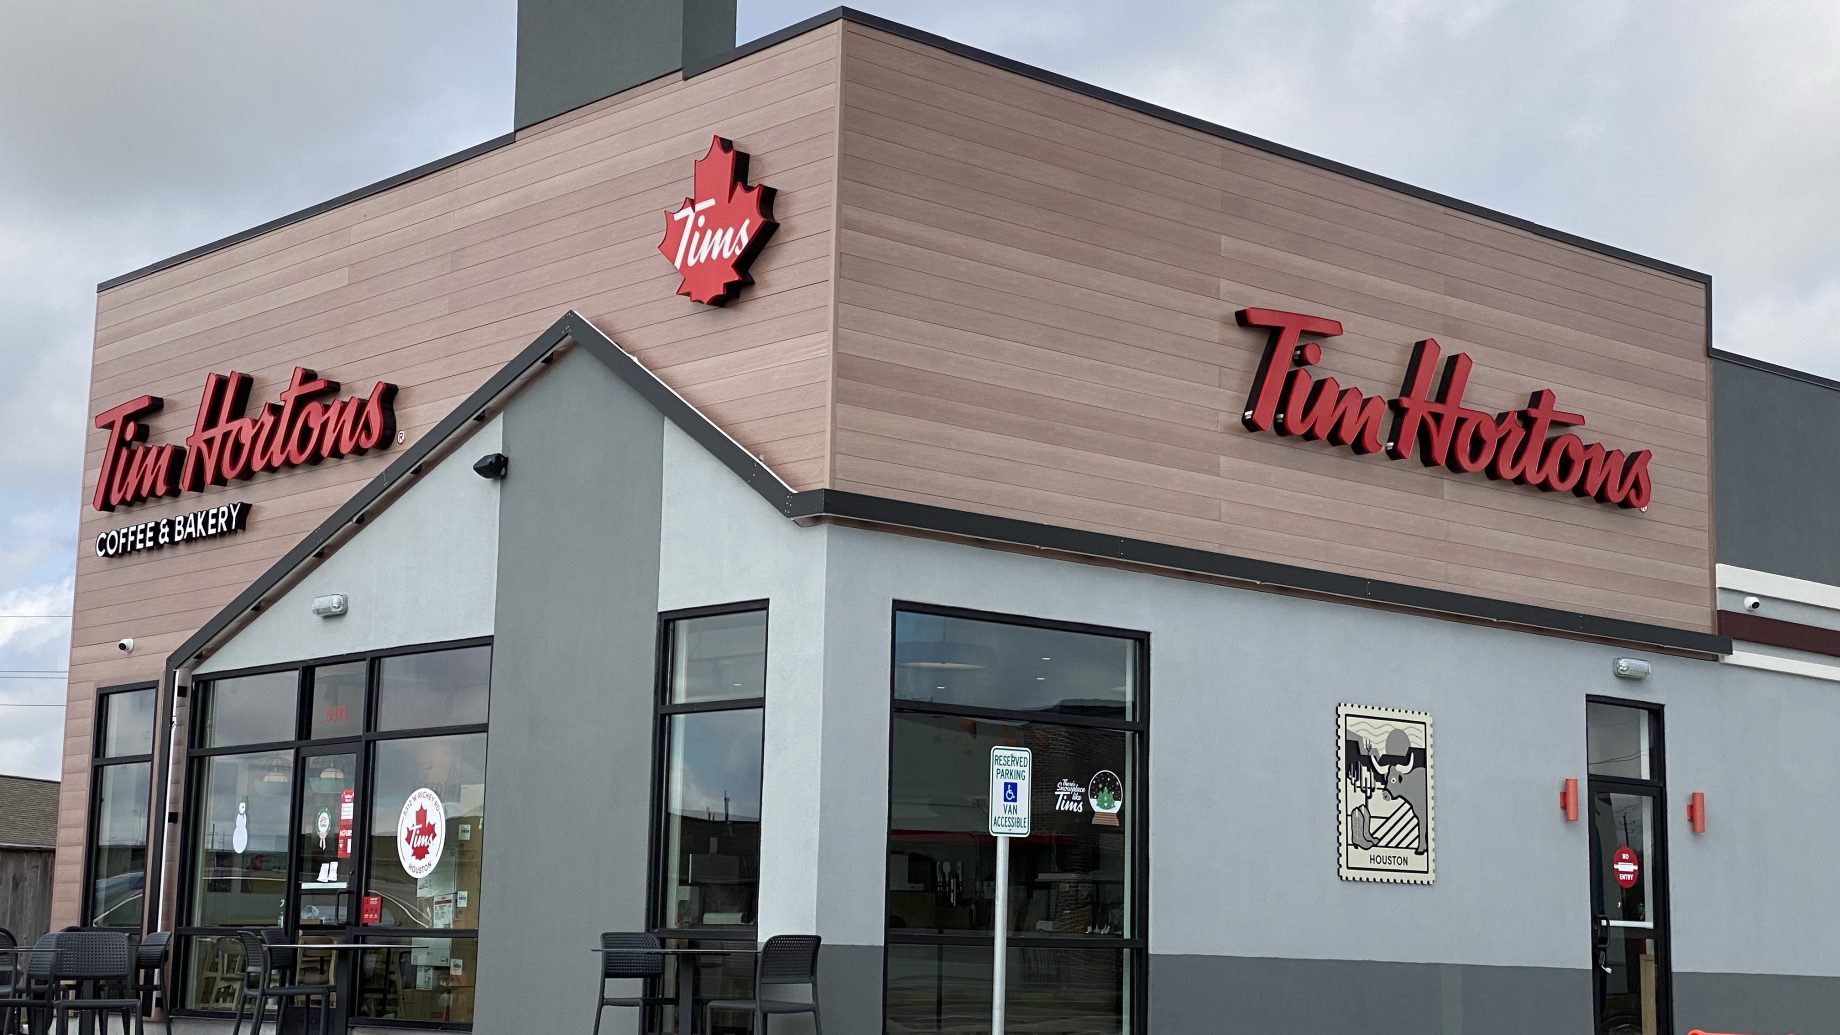 Third Tim Hortons Houston location delayed to early 2023